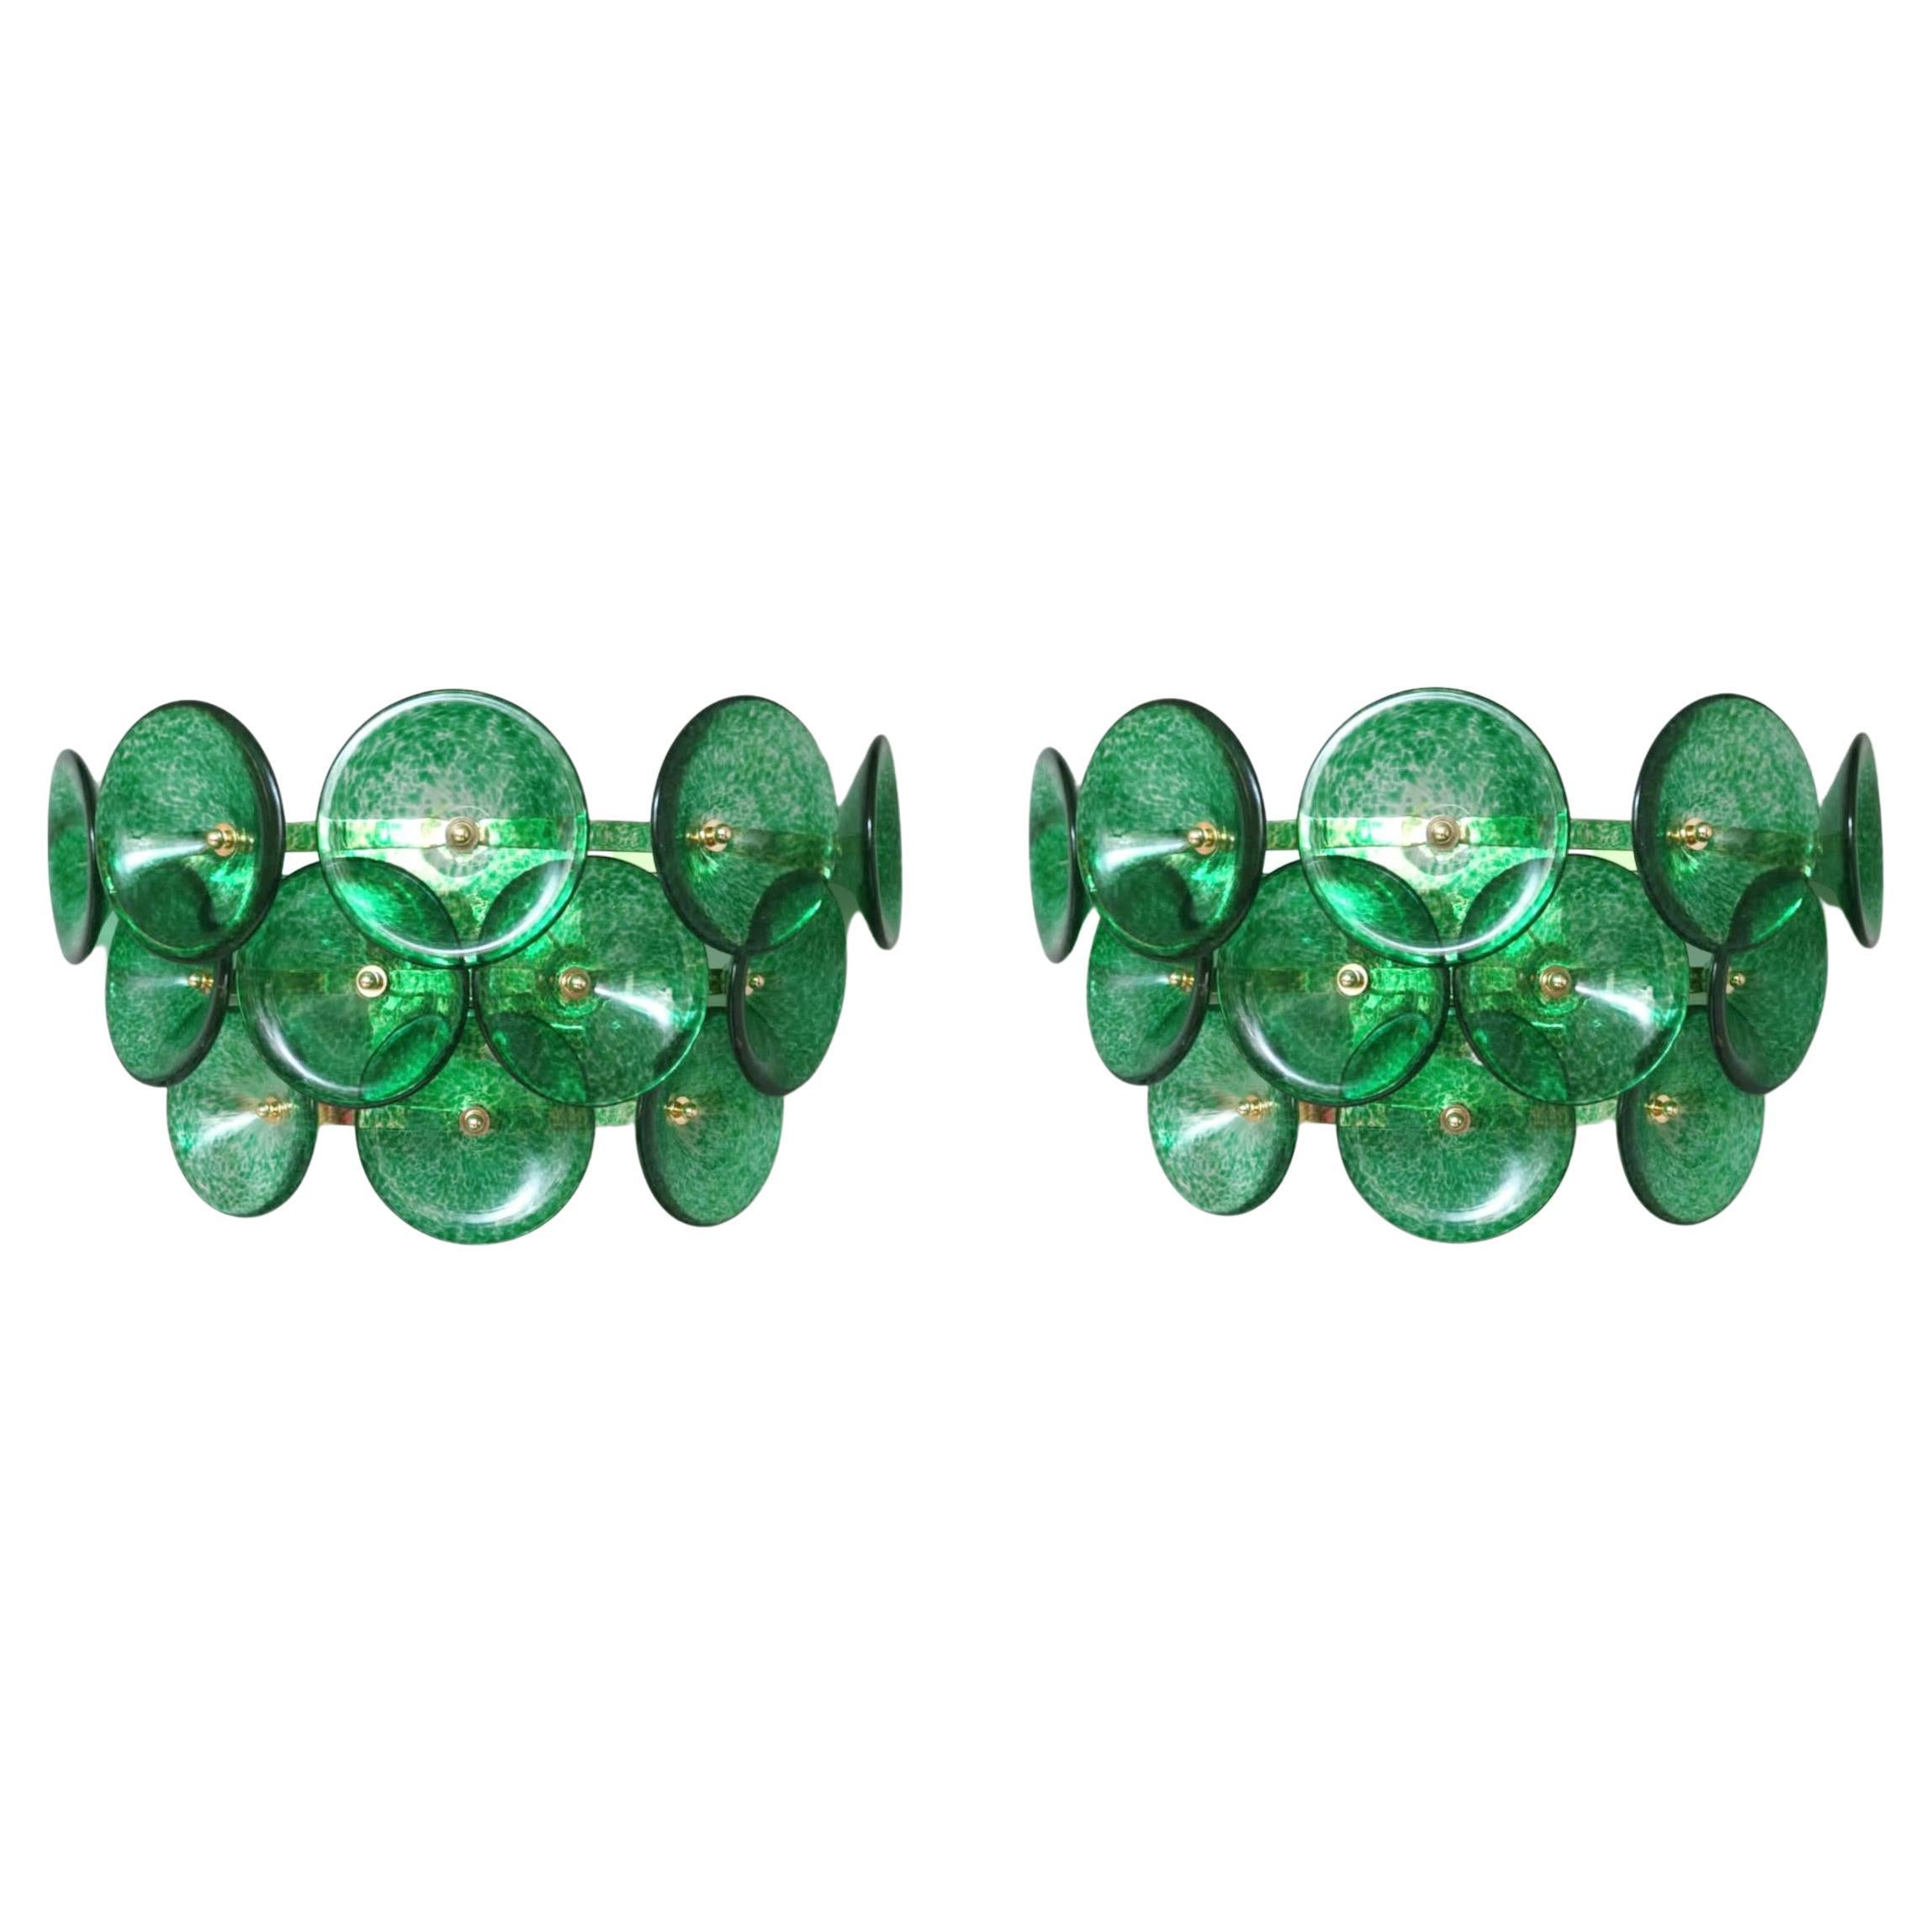 Pair of Green Trumpets Sconces